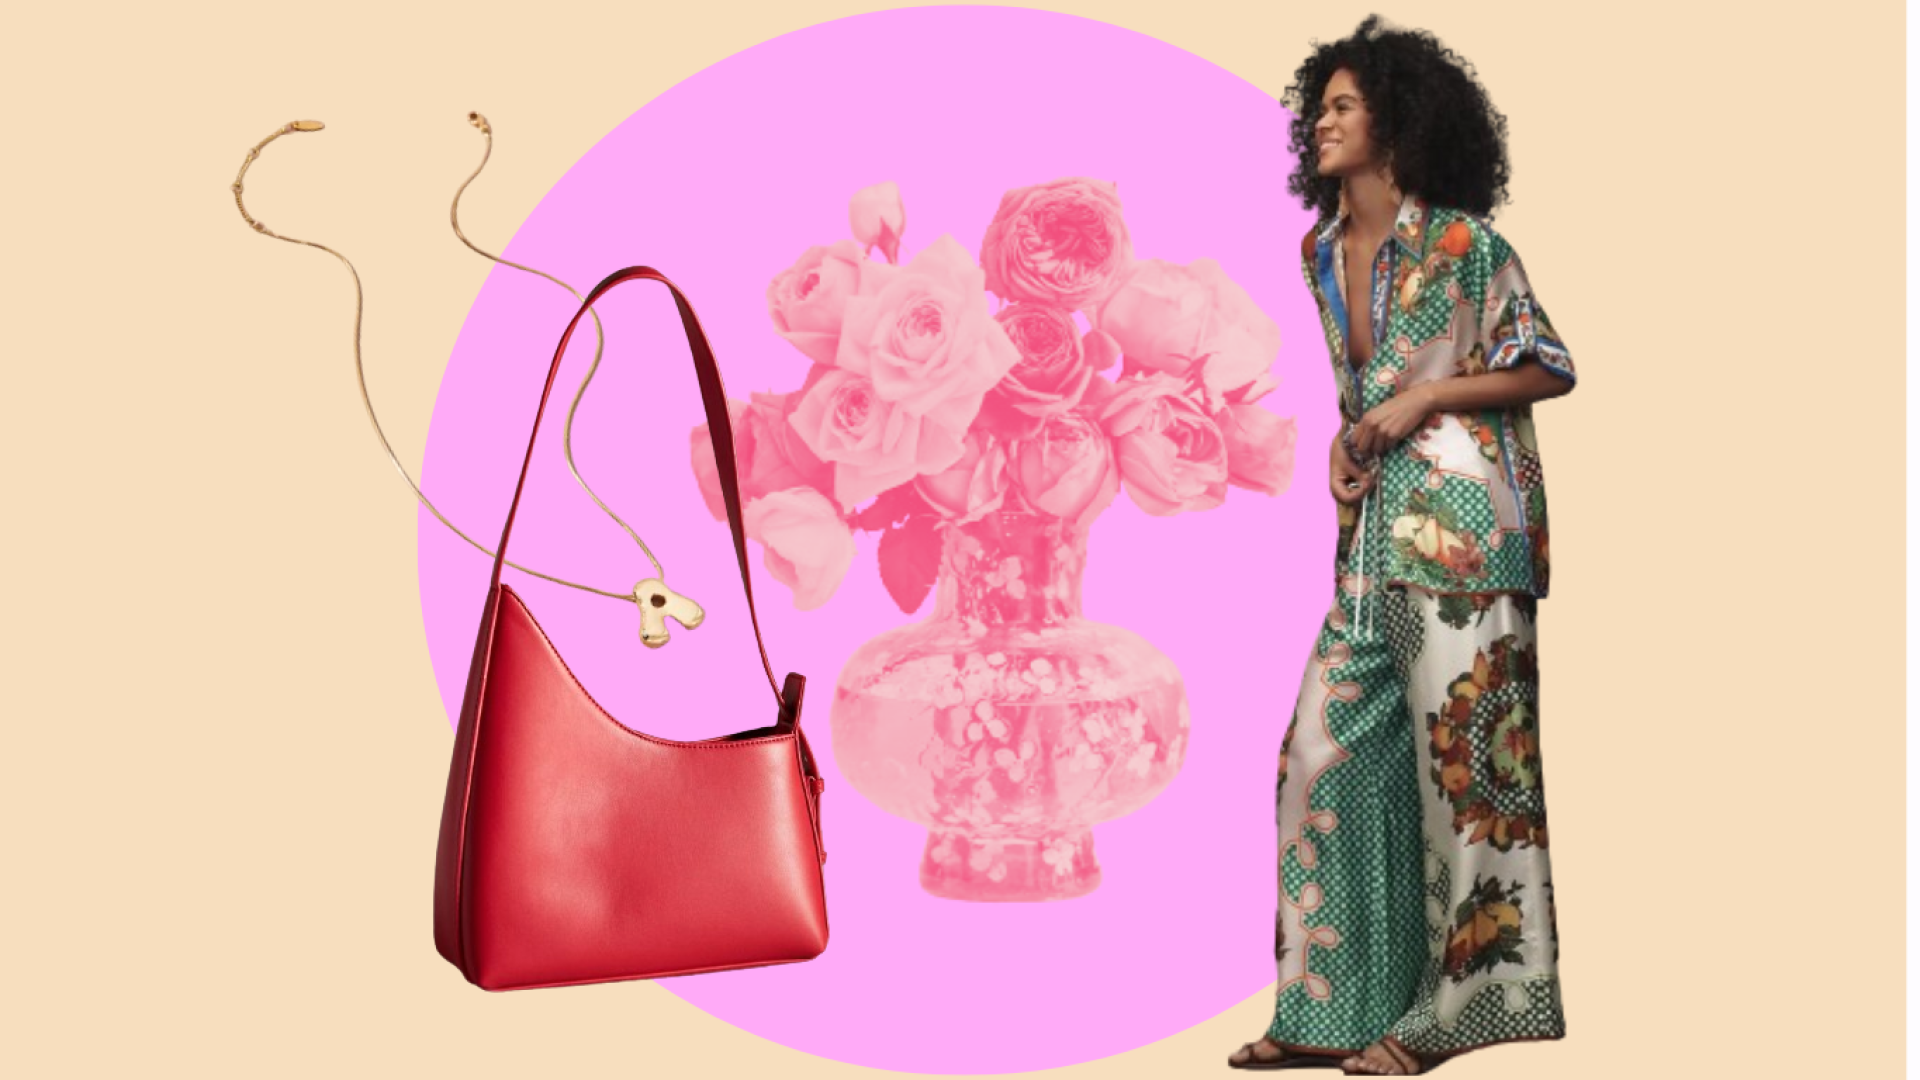 7 Anthropologie Picks That Will Make Great Mother's Day Gifts